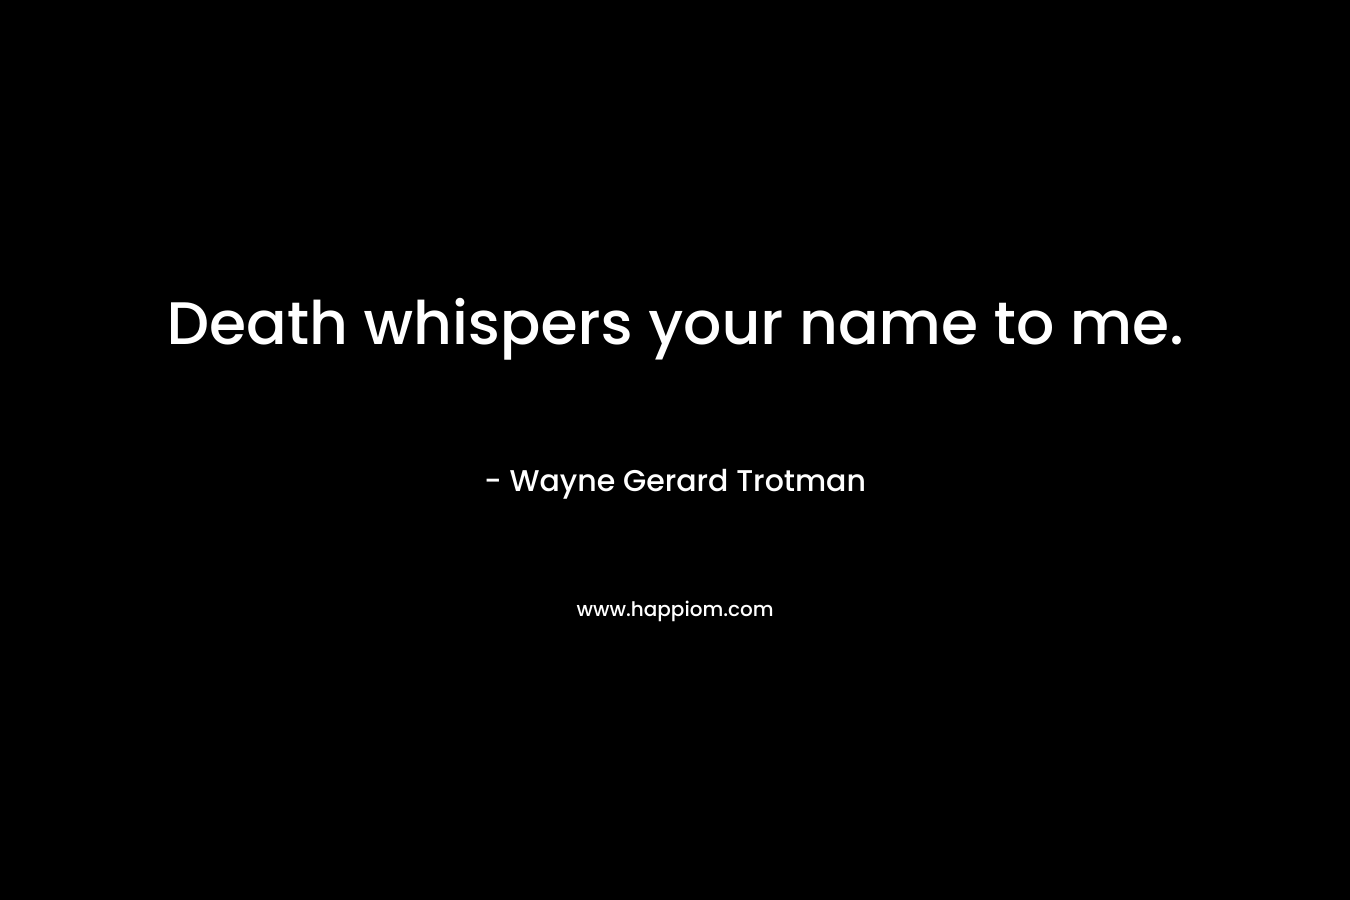 Death whispers your name to me.